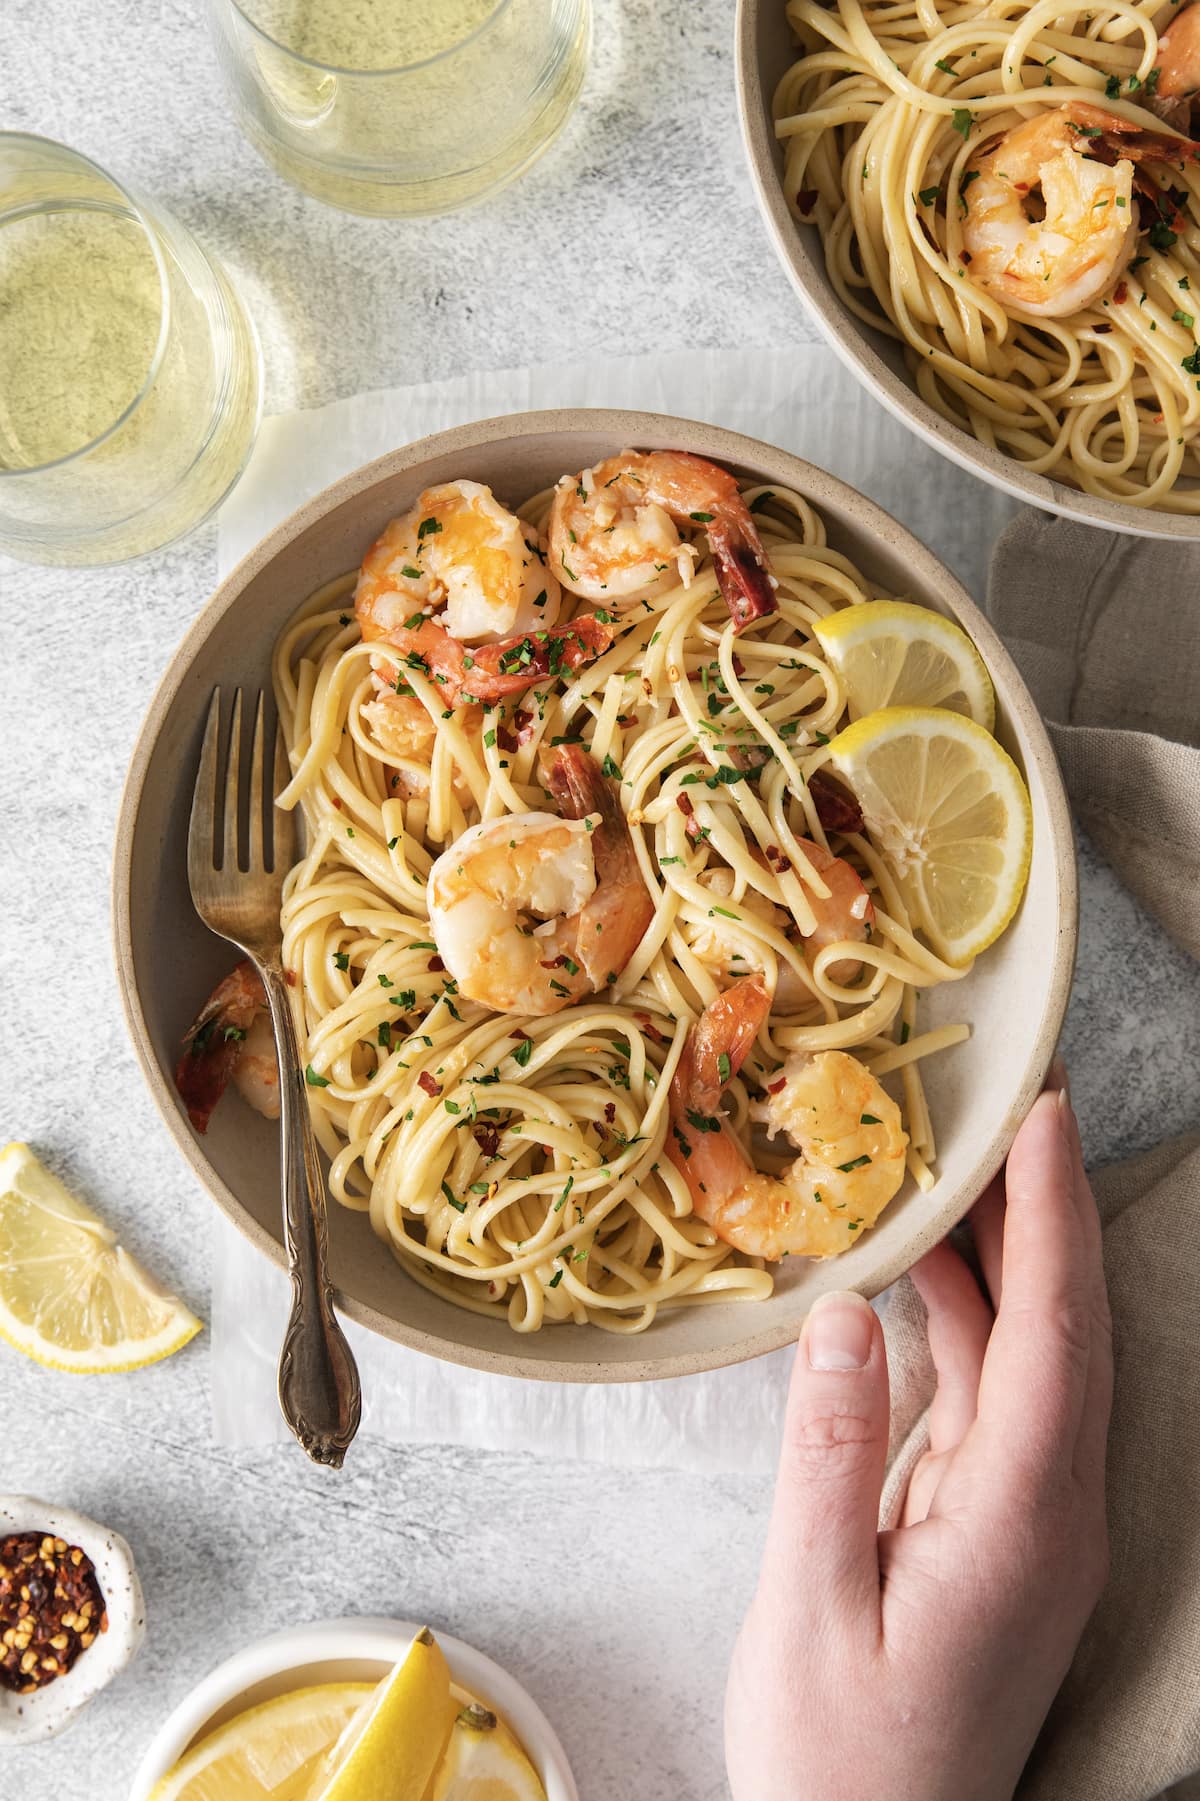 a hand touching a bowl with shrimp pasta with linguine, red pepper flakes, herbs, and lemon slices